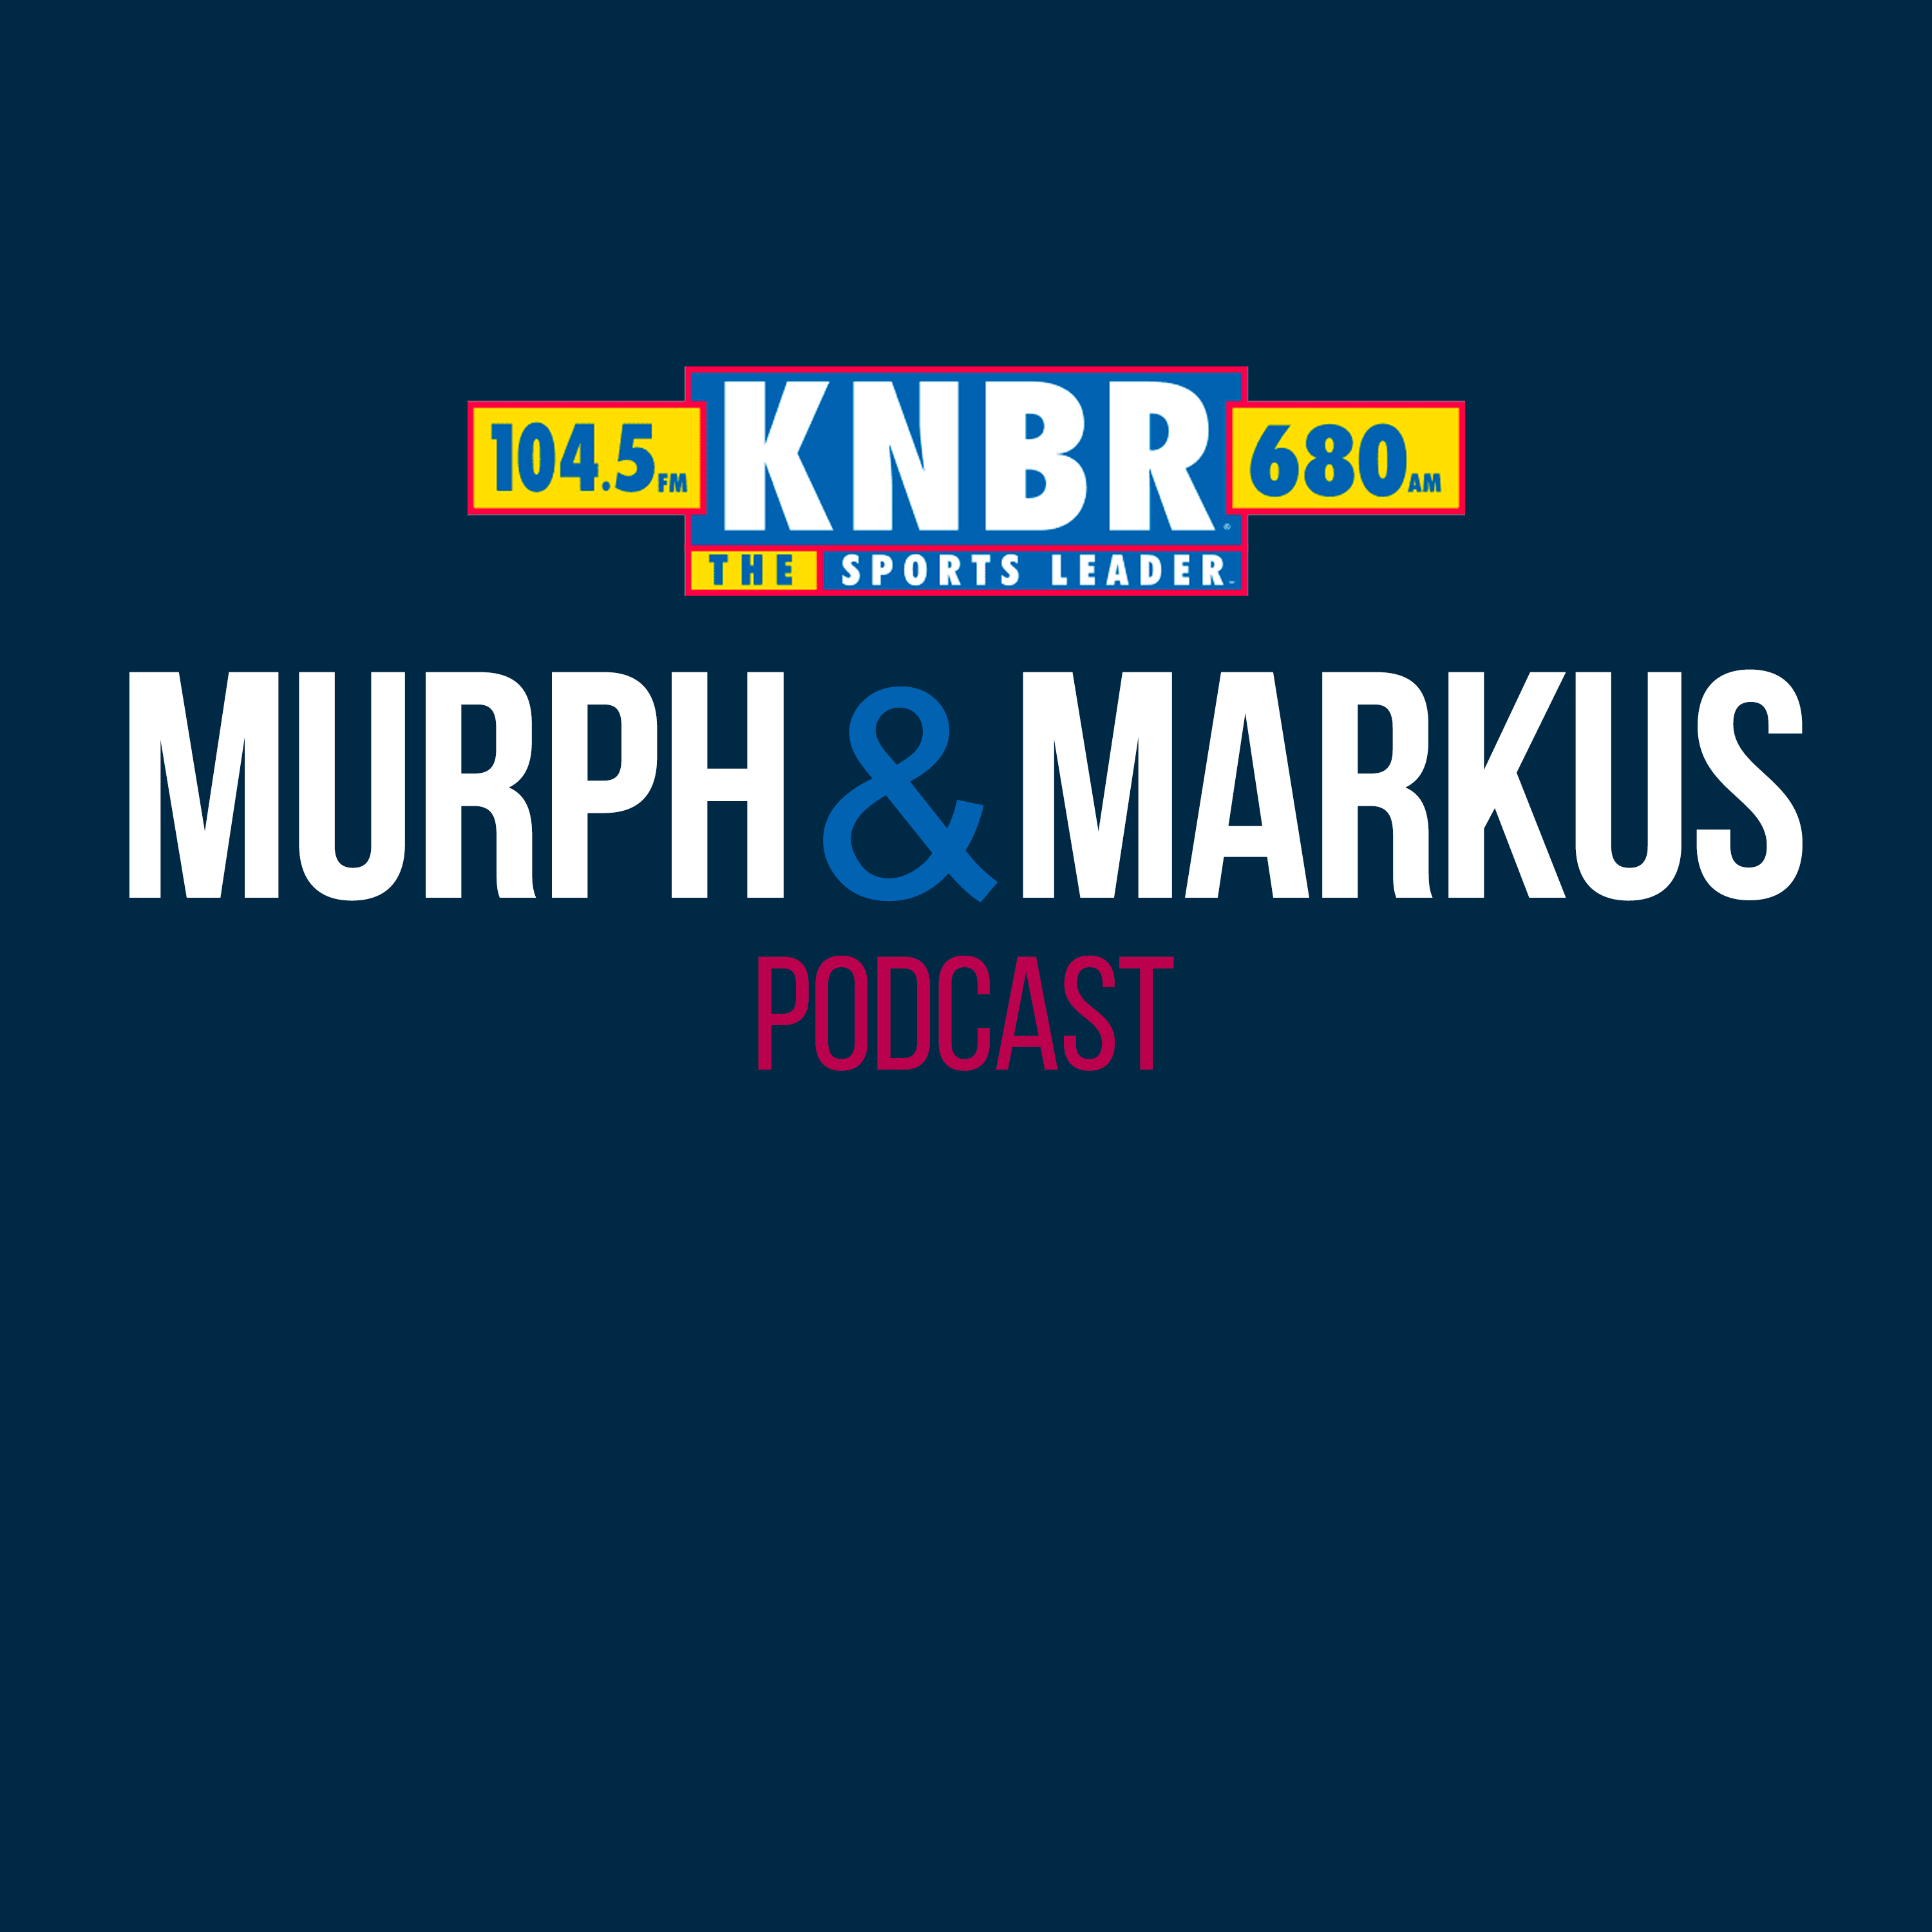 6-25 Hour 2: Murph & Markus react to the Giants honoring Willie Mays for the first time at home, talk to Duane Kuiper, and get into today's top story in the Big Hit